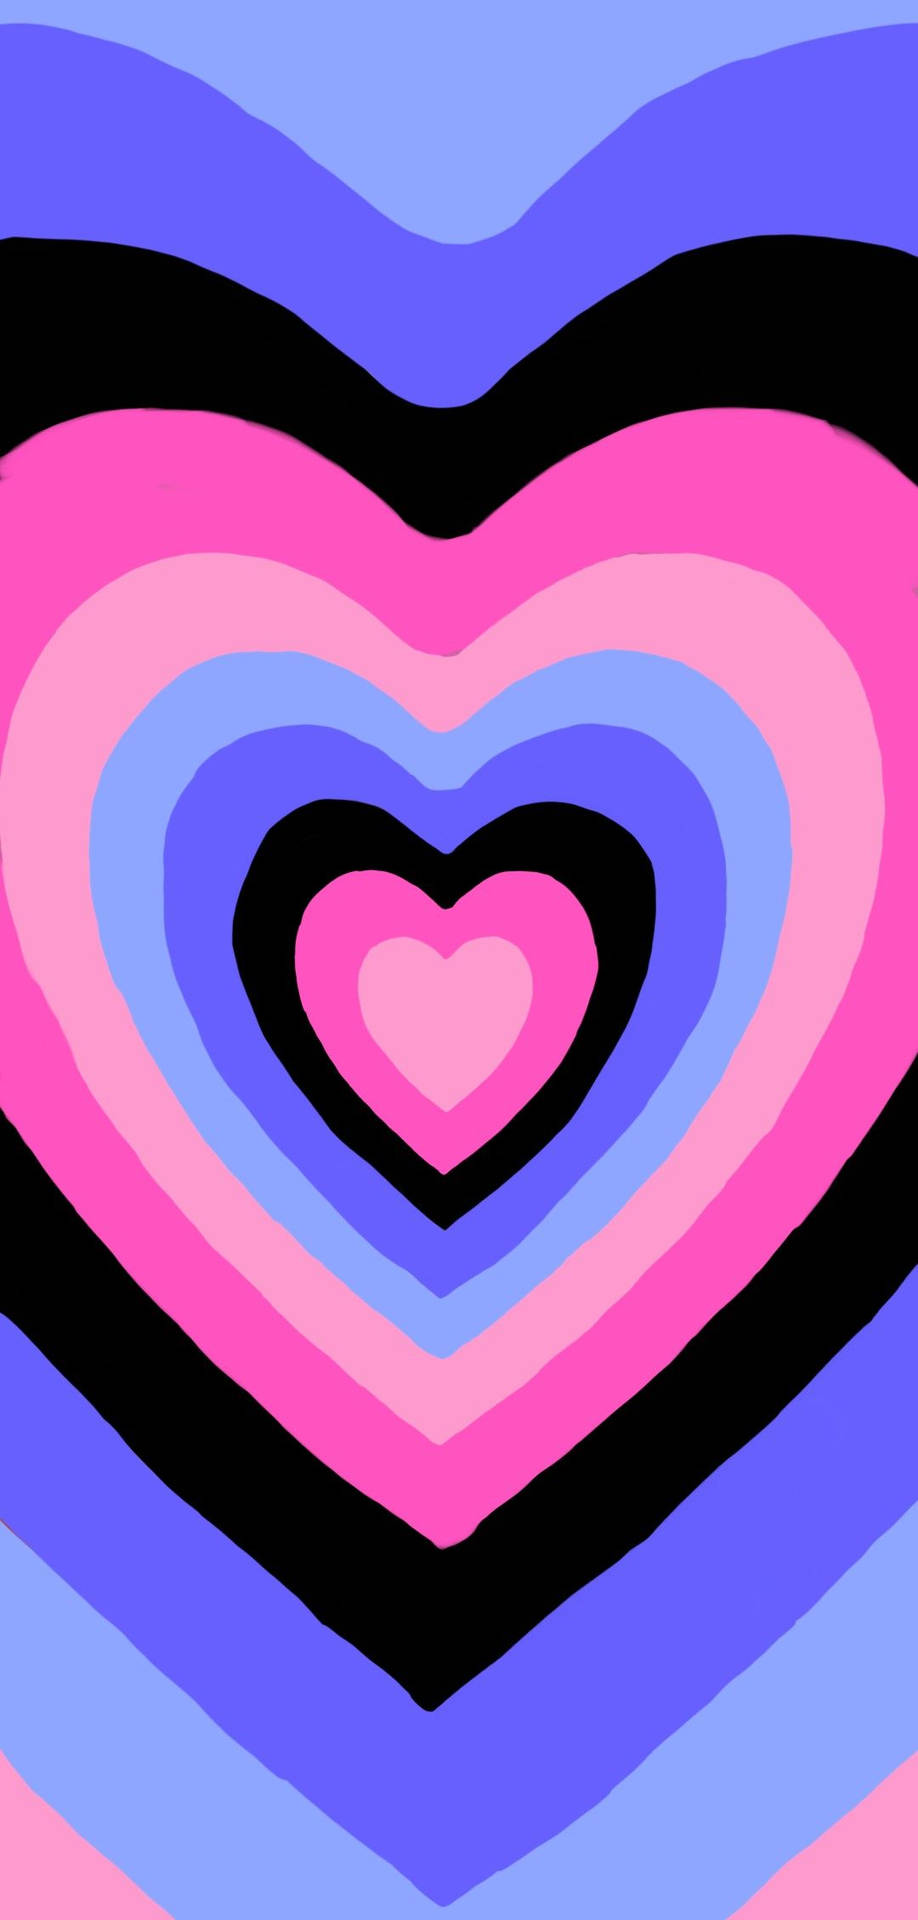 Omnisexual Colorful Hearts Pattern Wallpaper